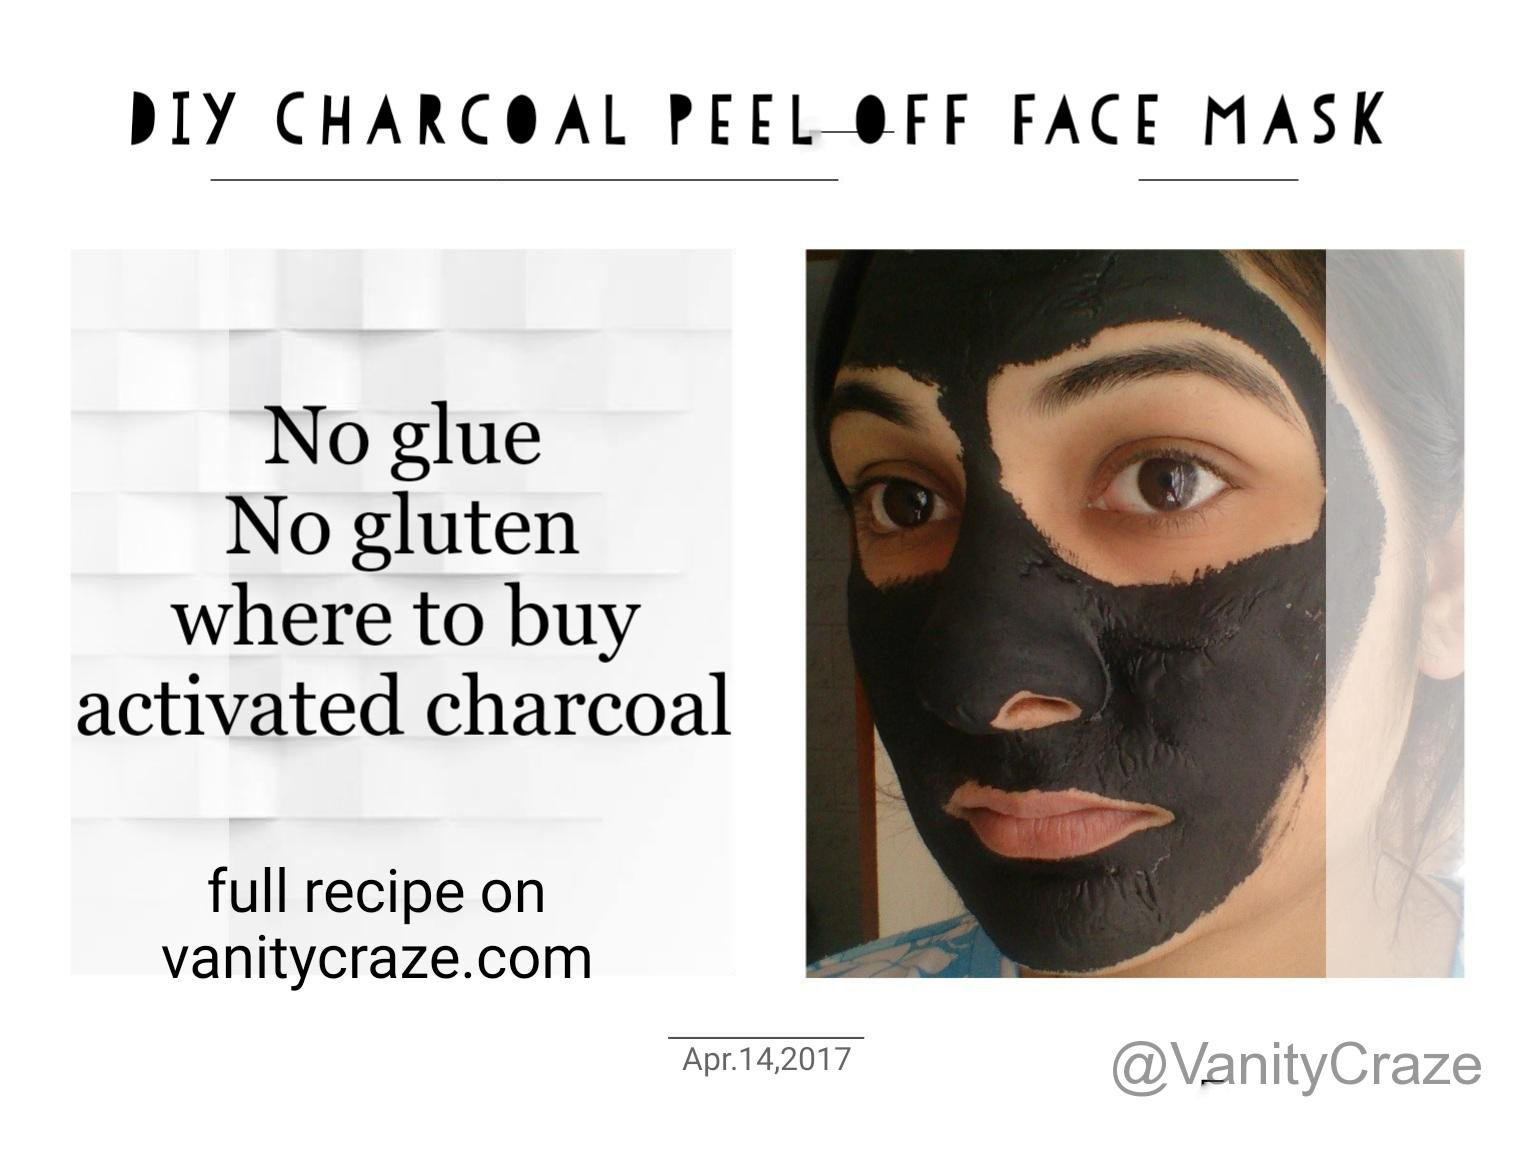 DIY Charcoal Face Mask Peel Off
 Activated Charcoal Face Mask Recipe With Glue